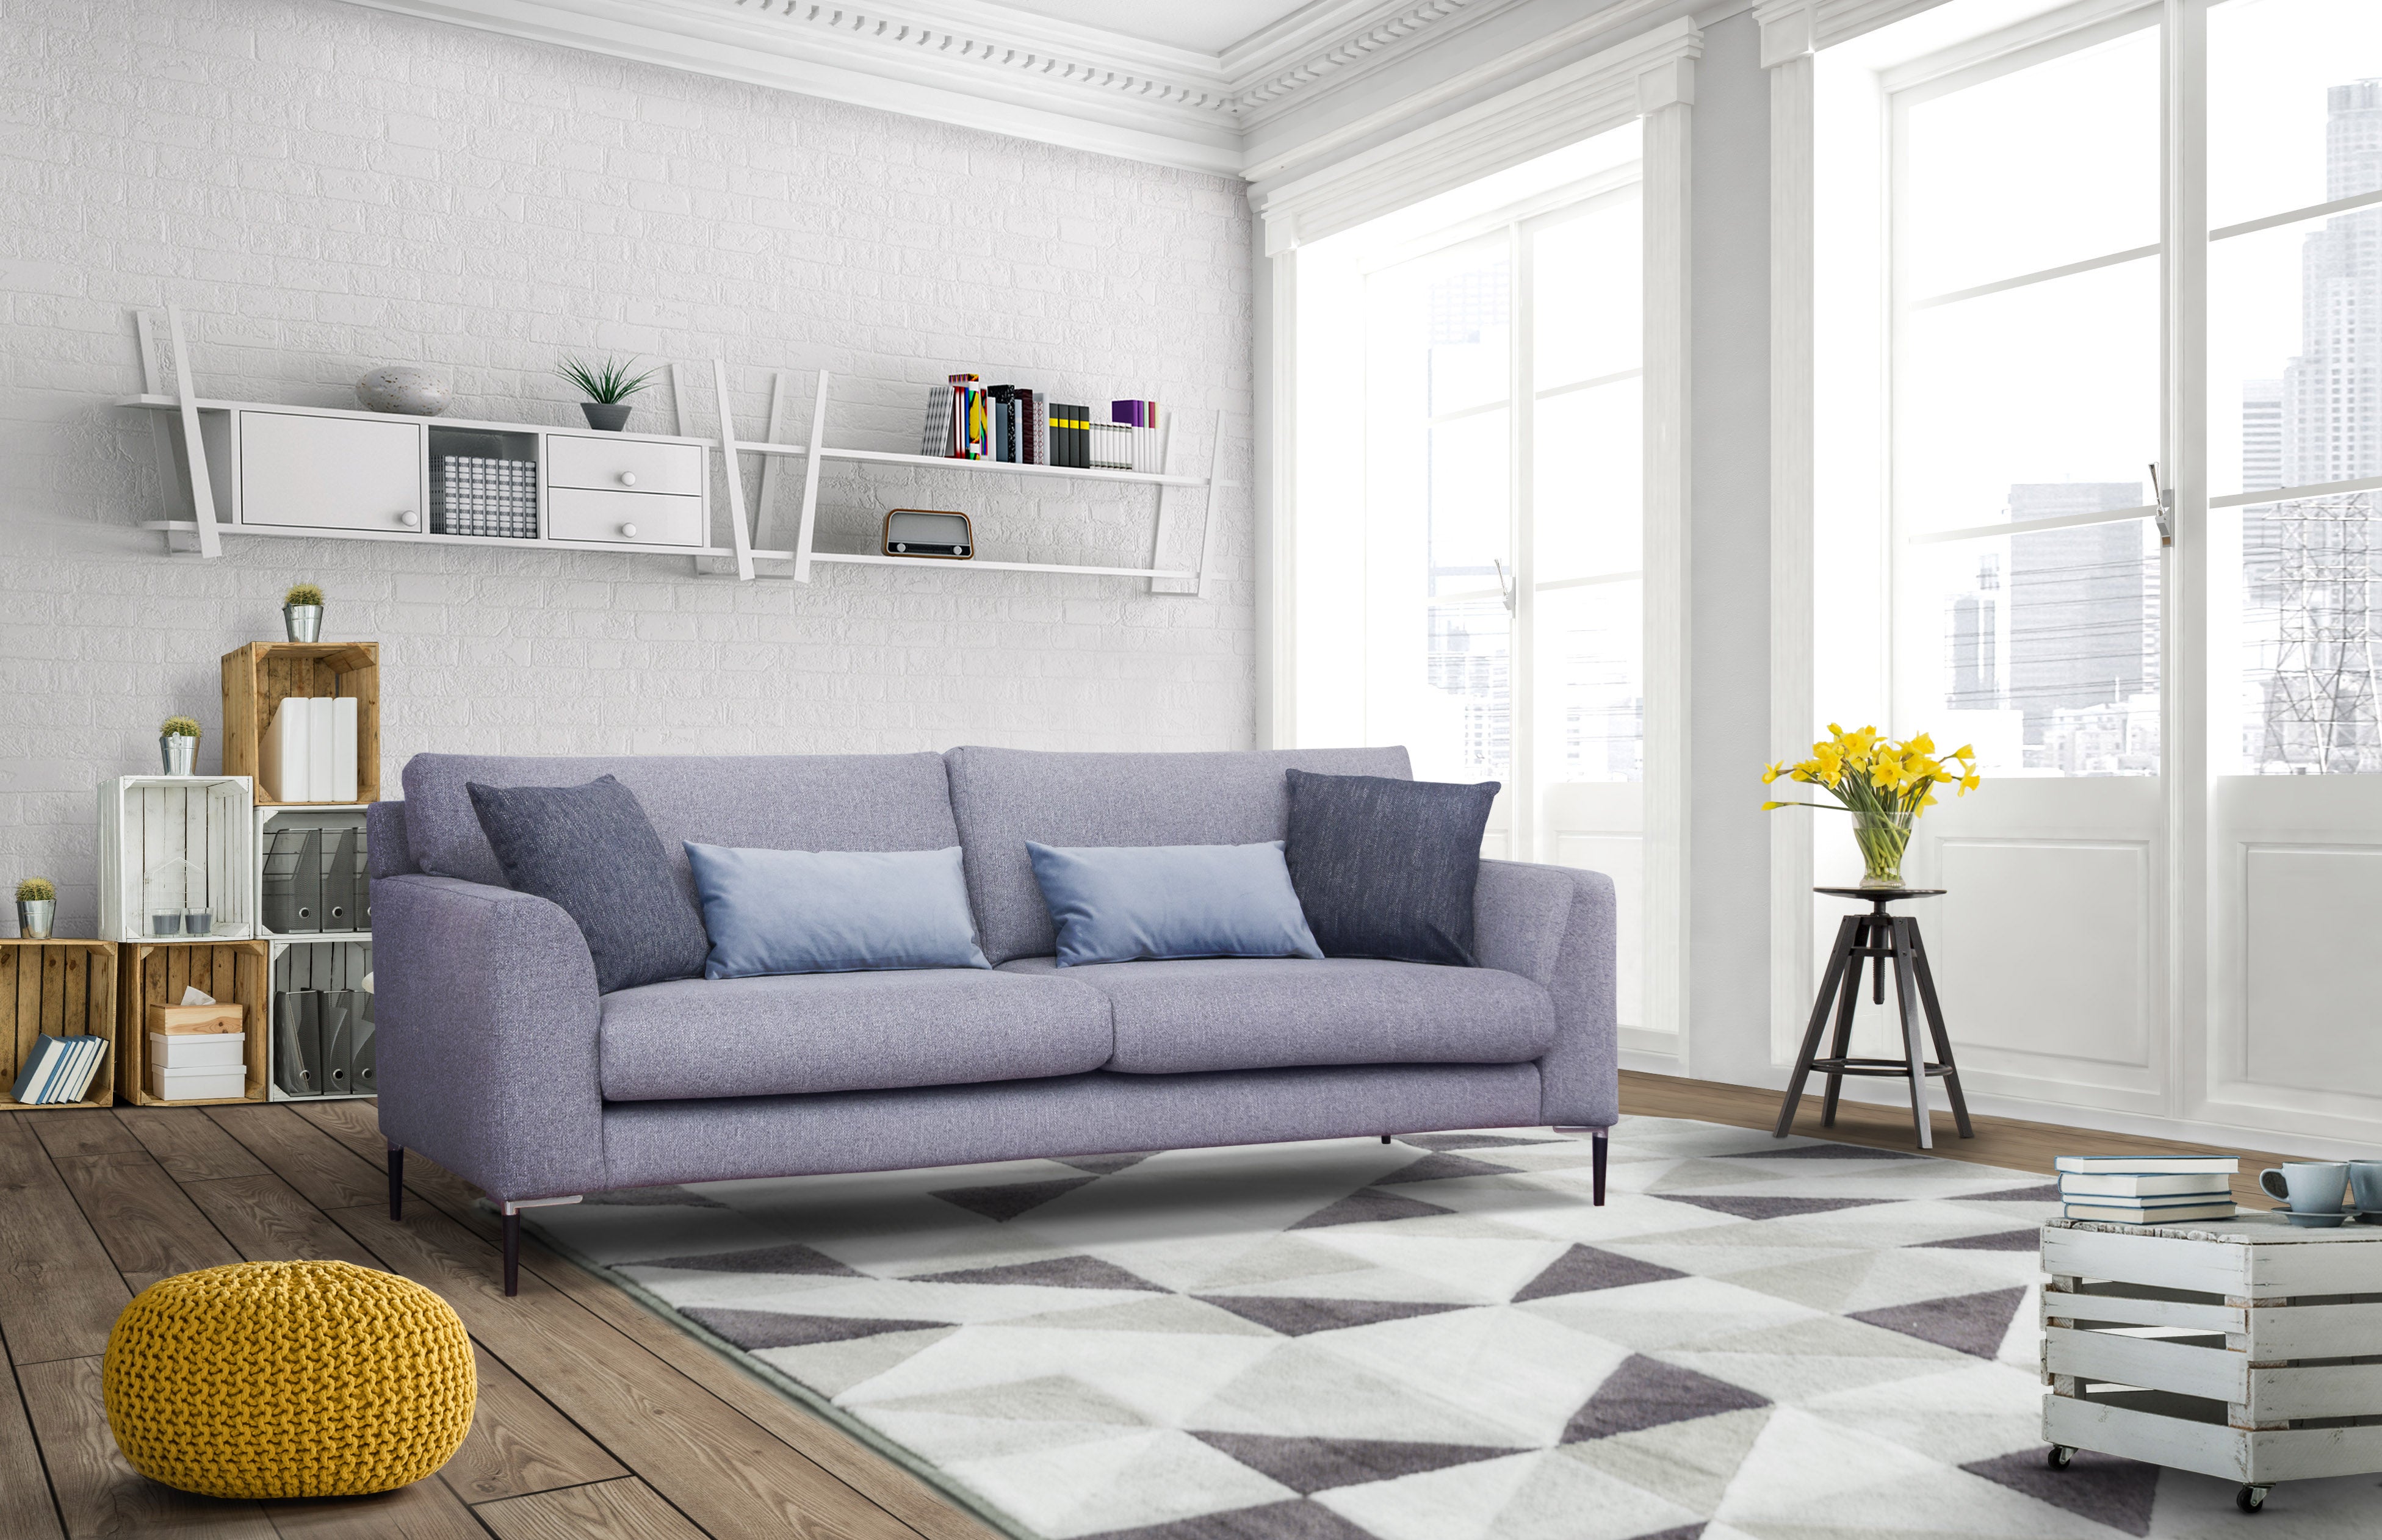 ViscoLogic CLARKSON Mid Century SOFA with Wooden Frame, High Resilience Foam and Sturdy Metal Legs